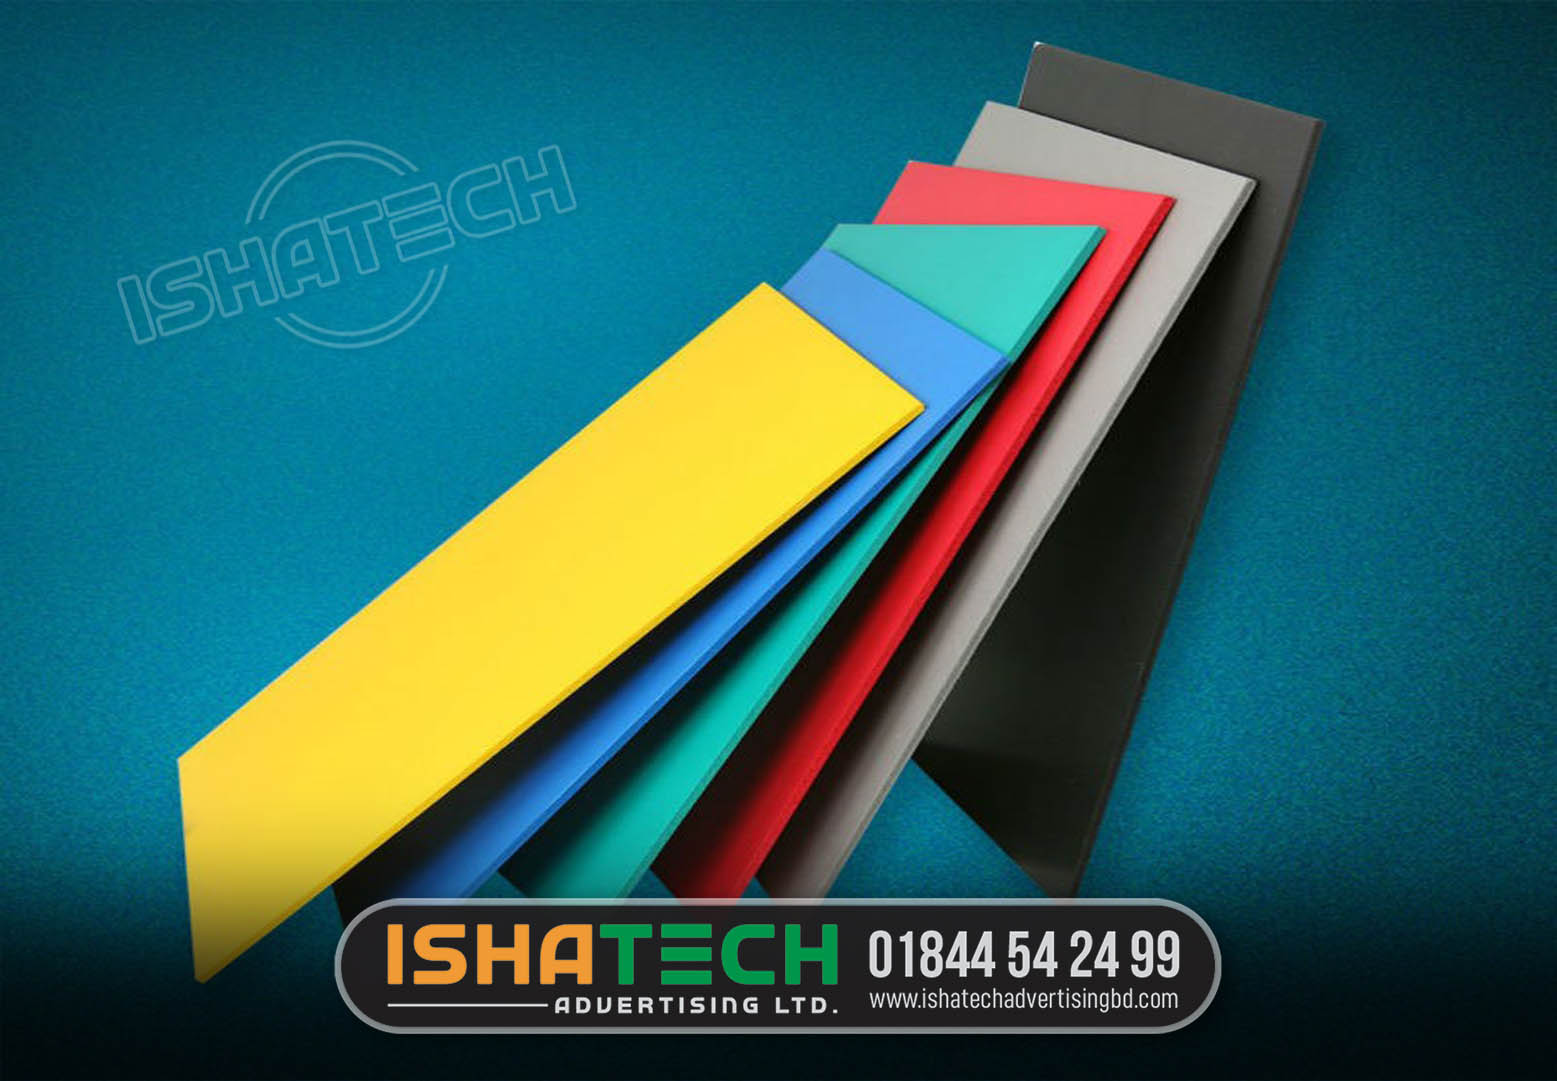 4mm pvc sheet price in Bangladesh, PVC Sheet Price in Bangladesh. 4×8 pvc sheet price in Bangladesh. 4mm pvc sheet price in Bangladesh. 12mm pvc sheet price in Bangladesh. Rfl pvc sheet price in Bangladesh. 2mm pvc sheet price in Bangladesh. upvc sheet price in Bangladesh. 18mm pvc board price in Bangladesh. Find the PVC Sheet Price in Bangladesh. RFL is the Largest Manufacturer of UPVC sheets in BD. Visit us to find the glossy, laser cutting, colored, soft, white & PVC sheet at cheap prices. 3mm PVC Board White for Craft and DIY Project 3 pcs. 3mm PVC Board 5pcs White/blue/yellow for Craft. 5mm PVC Board 5pcs White for Craft and DIY Project. PVC Board 8mm white colour for DIY project model.